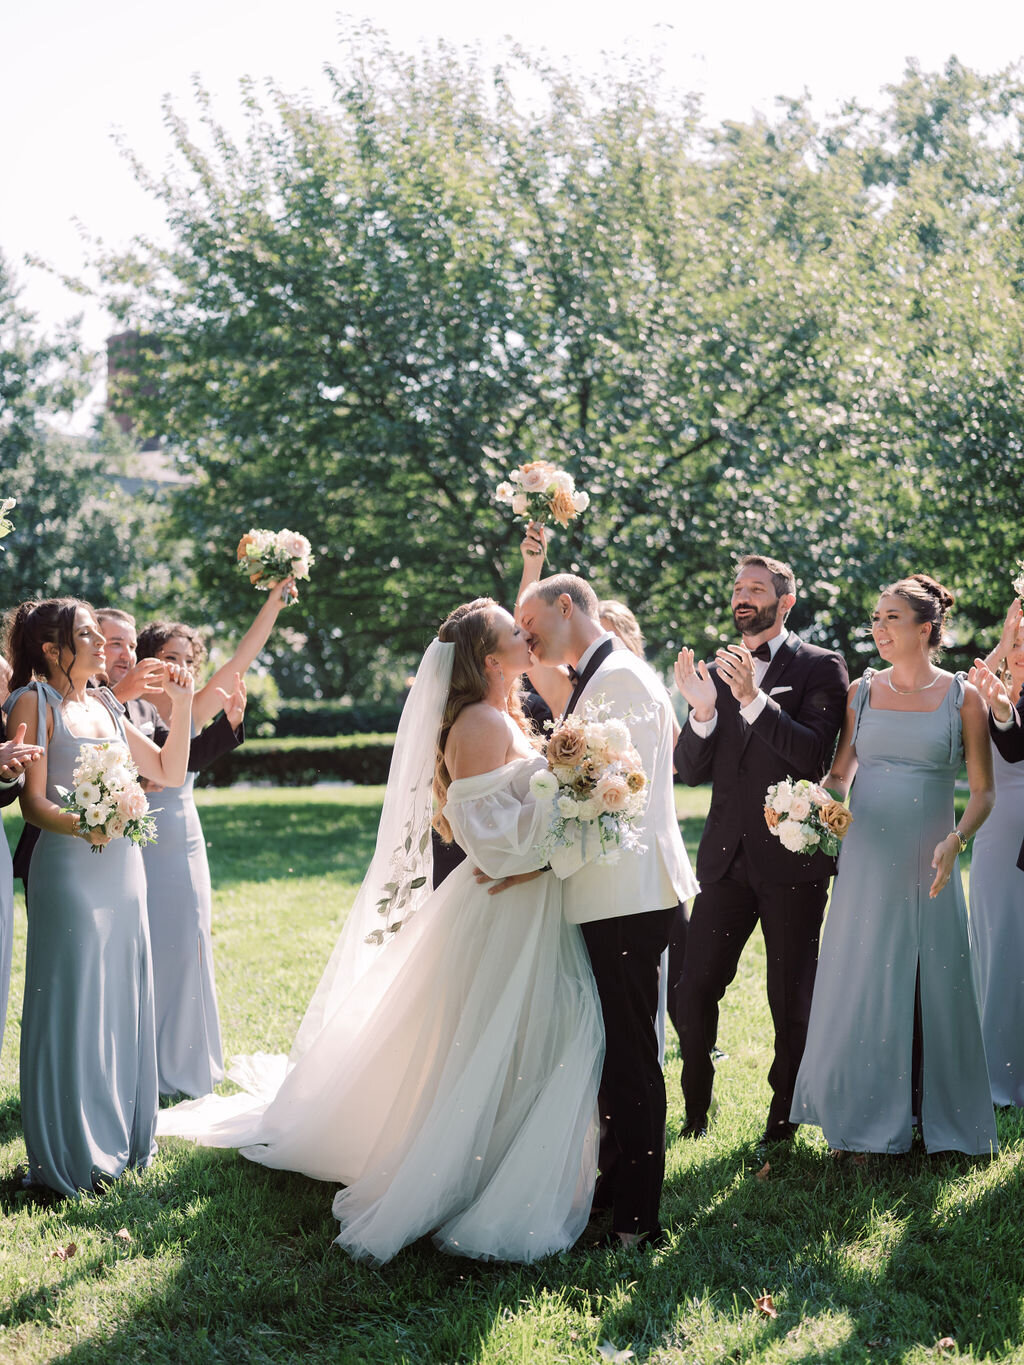 Bride and groom kissing in front of bridal party wearing a white tuxedo and light blue dresses